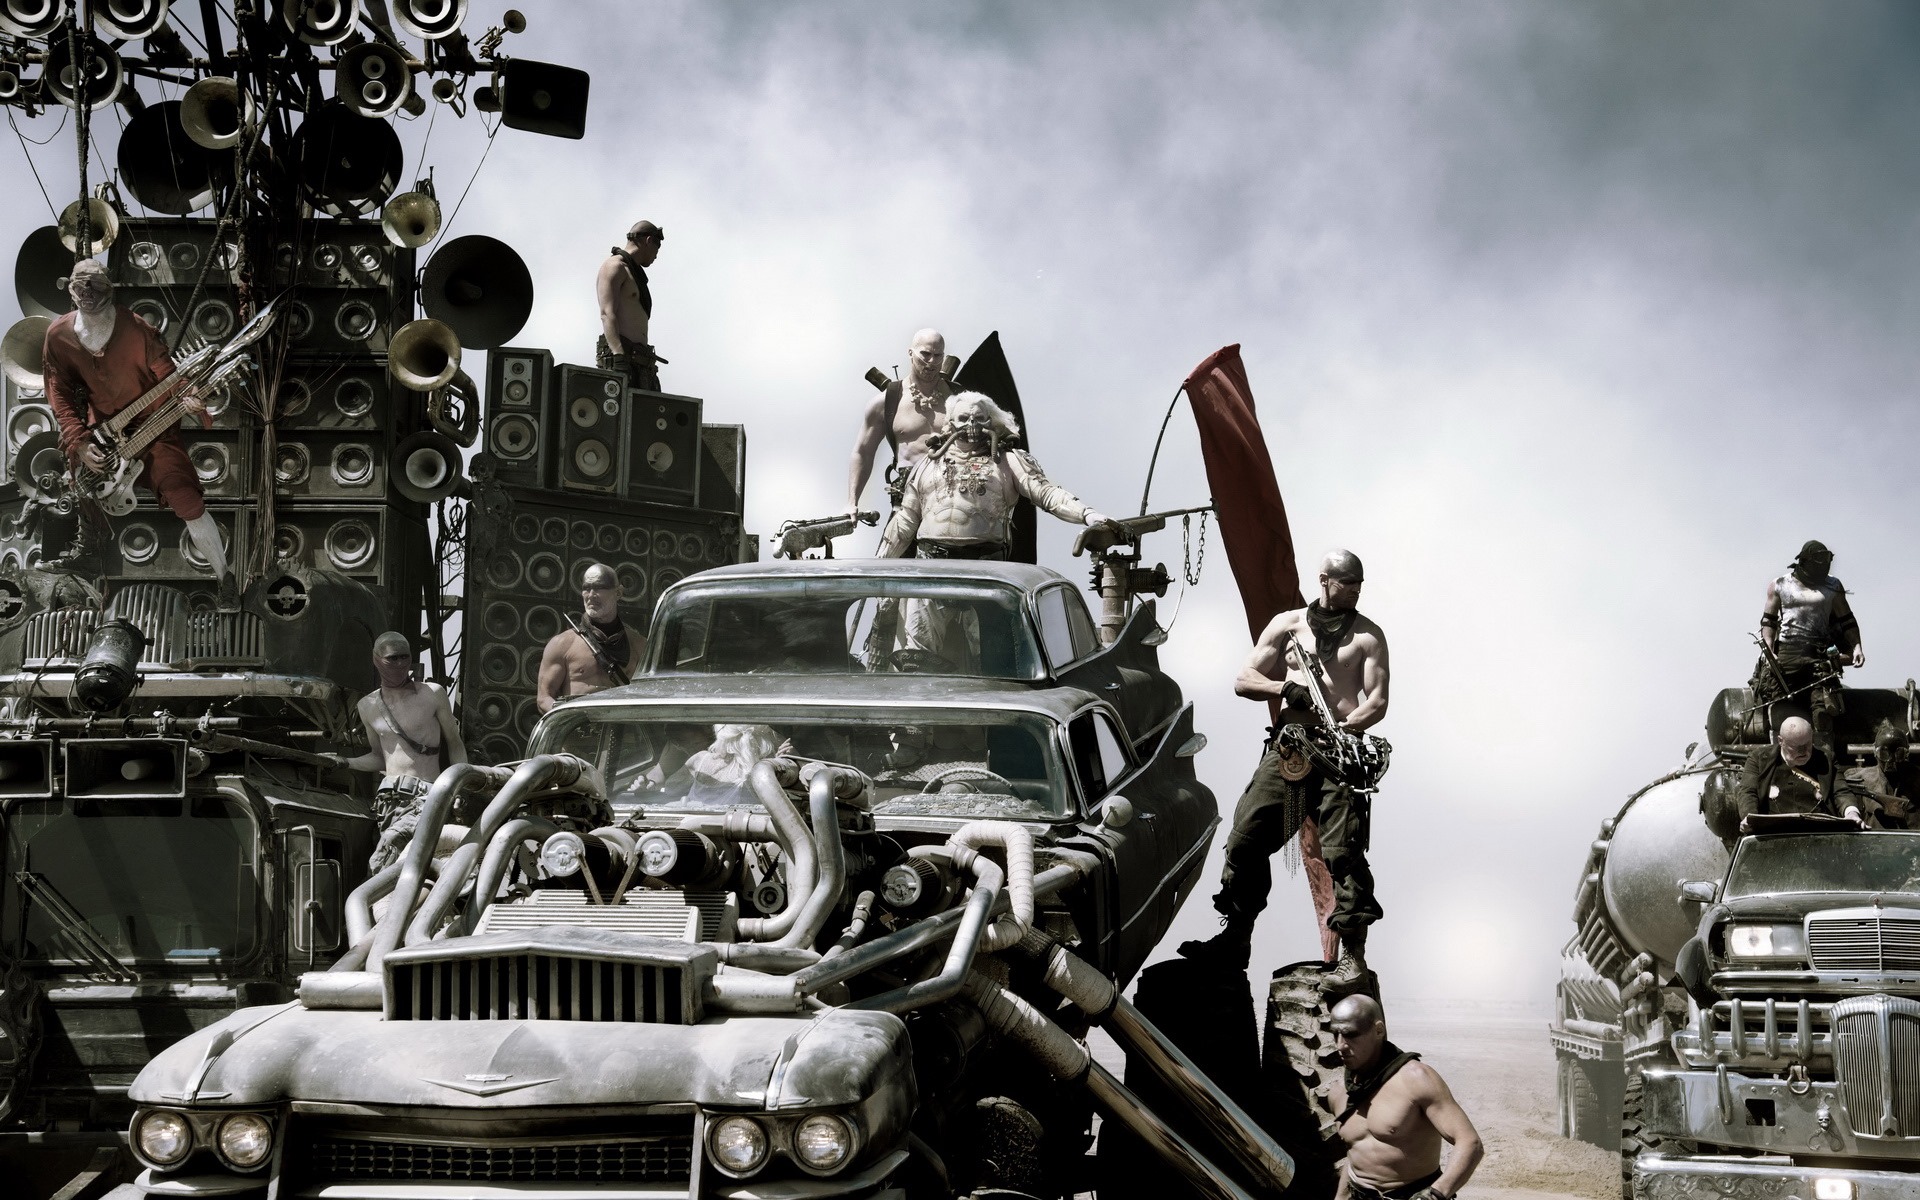 Mad Max: Fury Road, HD movie wallpapers #27 - 1920x1200